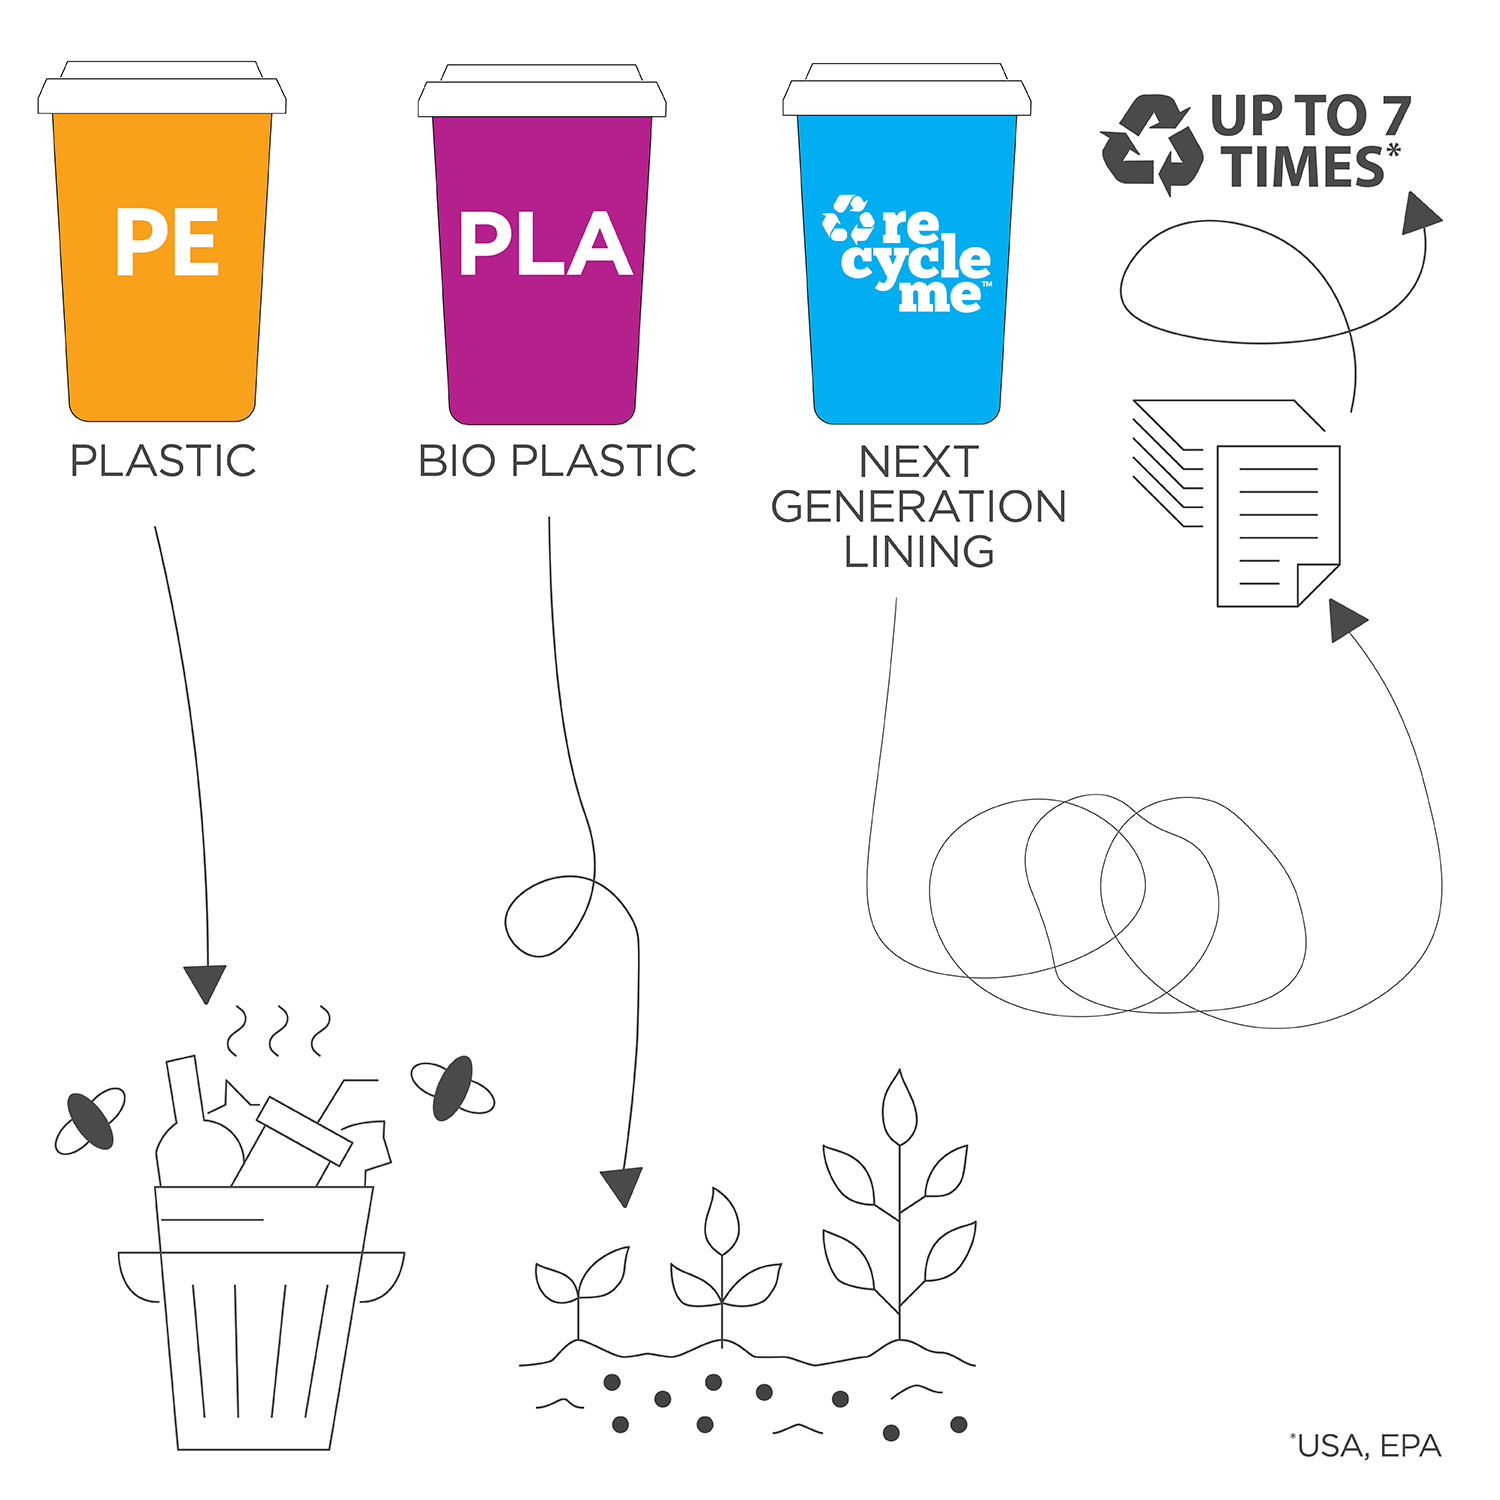 Image showing comparison of cups. PE cups to landfill. PLA or Bio cups have one use and then become compost. RecycleMe cups live again and again.